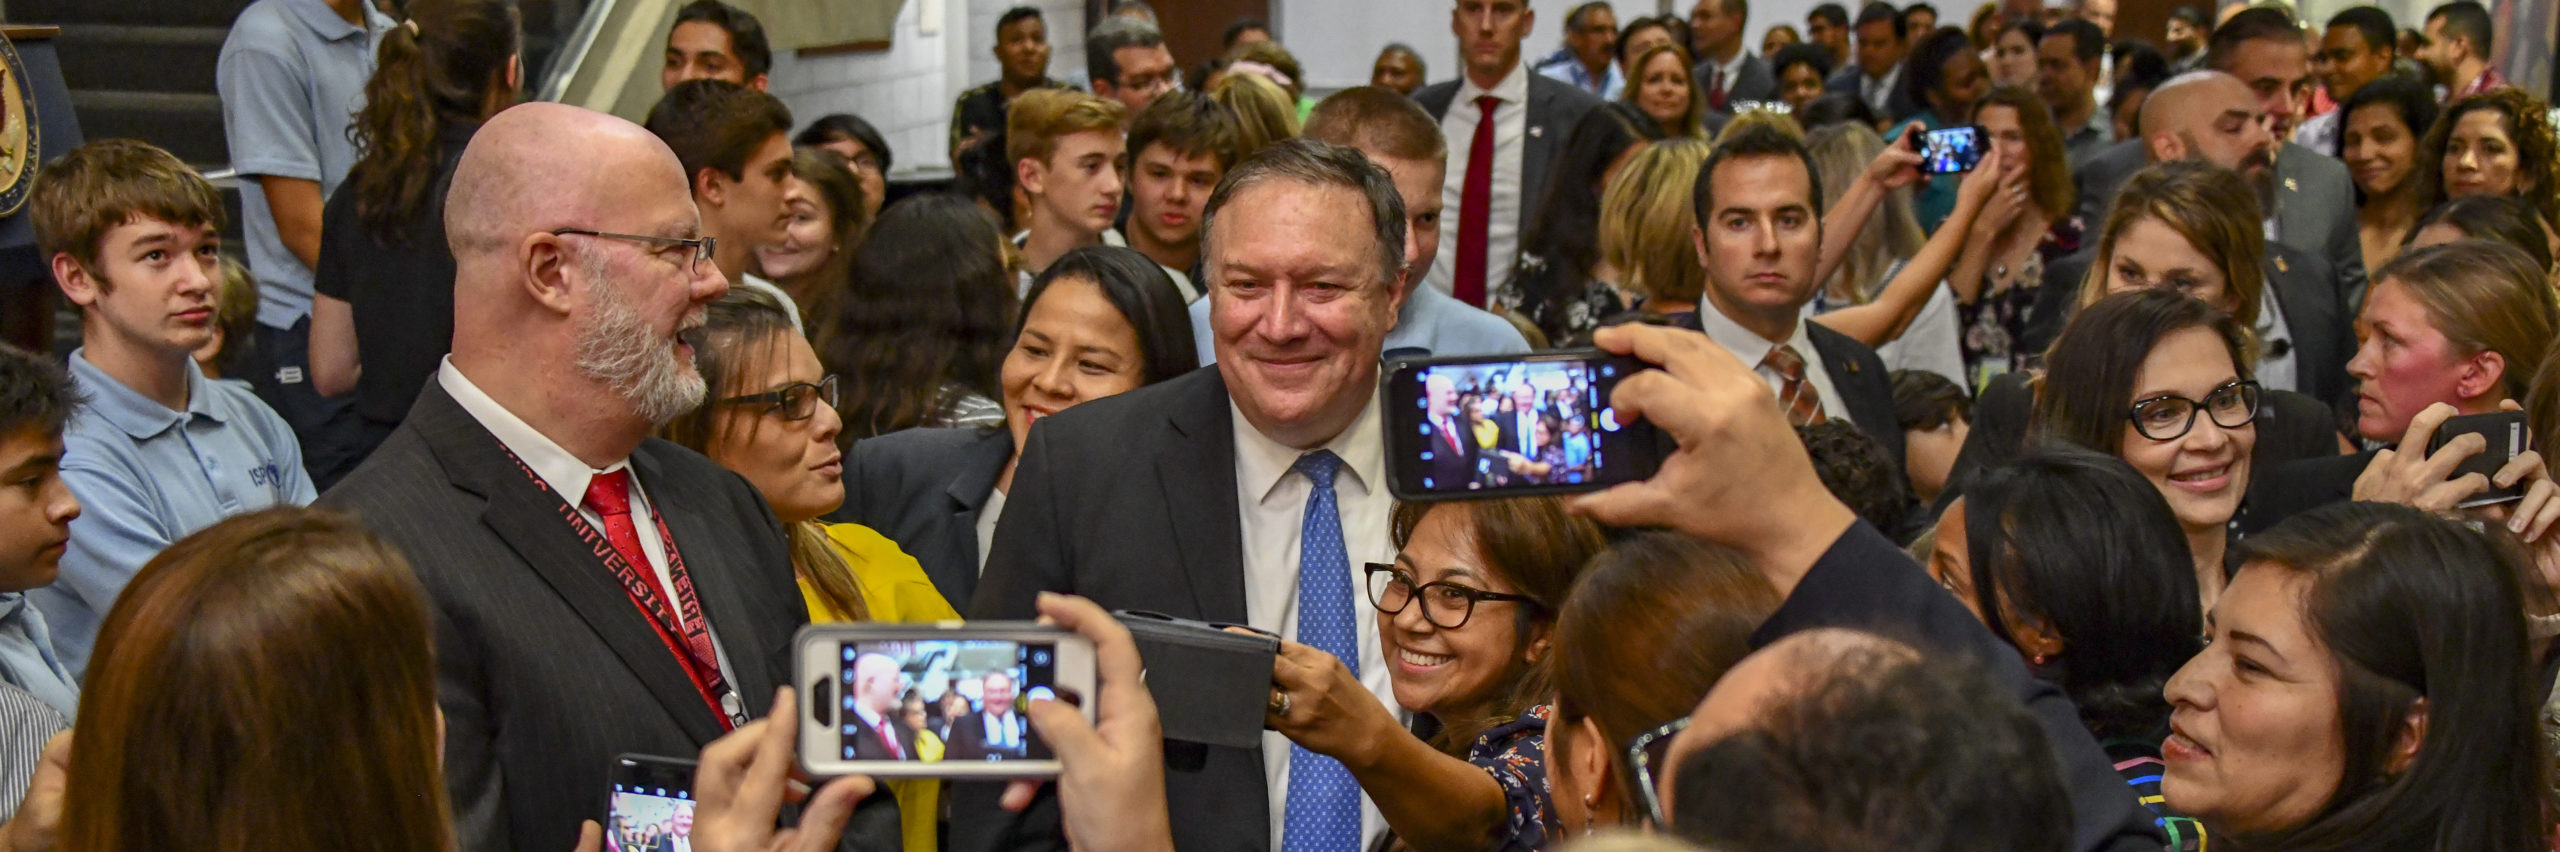 U.S. Secretary of State Michael R. Pompeo poses for photos with embassy staff at U.S. Panama in Panama City on October 18, 2018. [State Department photo by Ron Przysucha/ Public Domain]